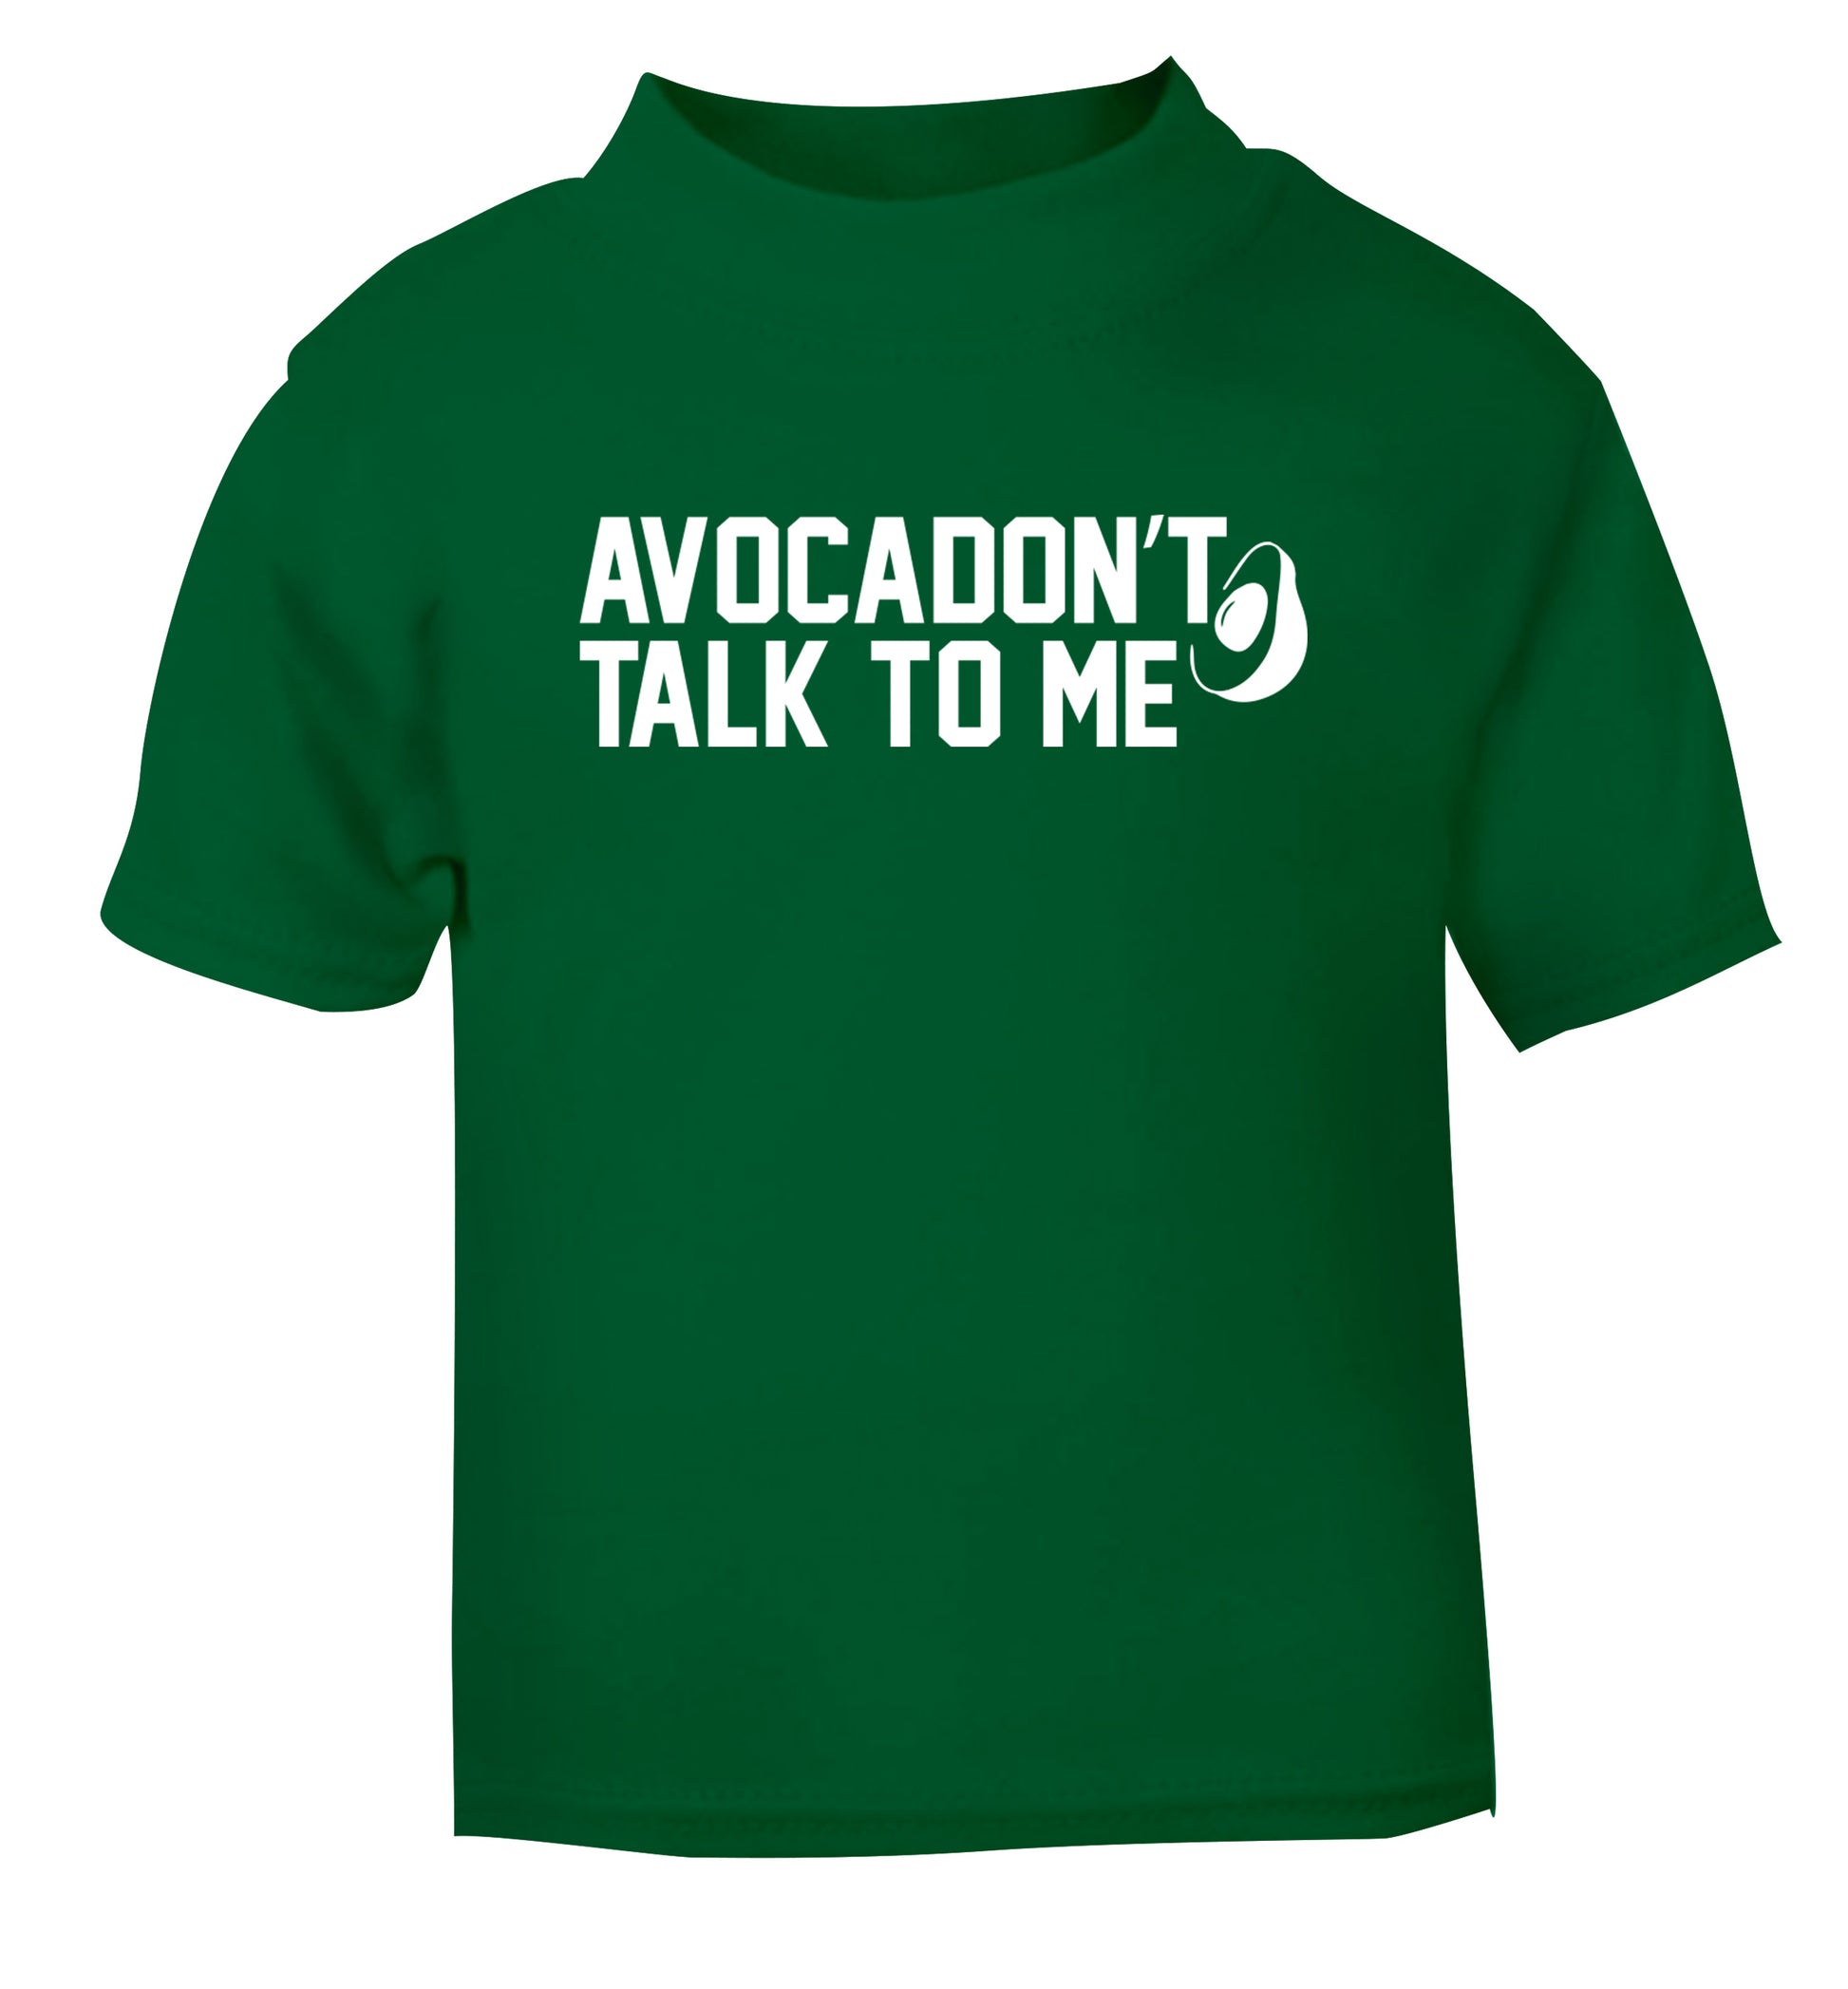 Avocadon't talk to me green Baby Toddler Tshirt 2 Years